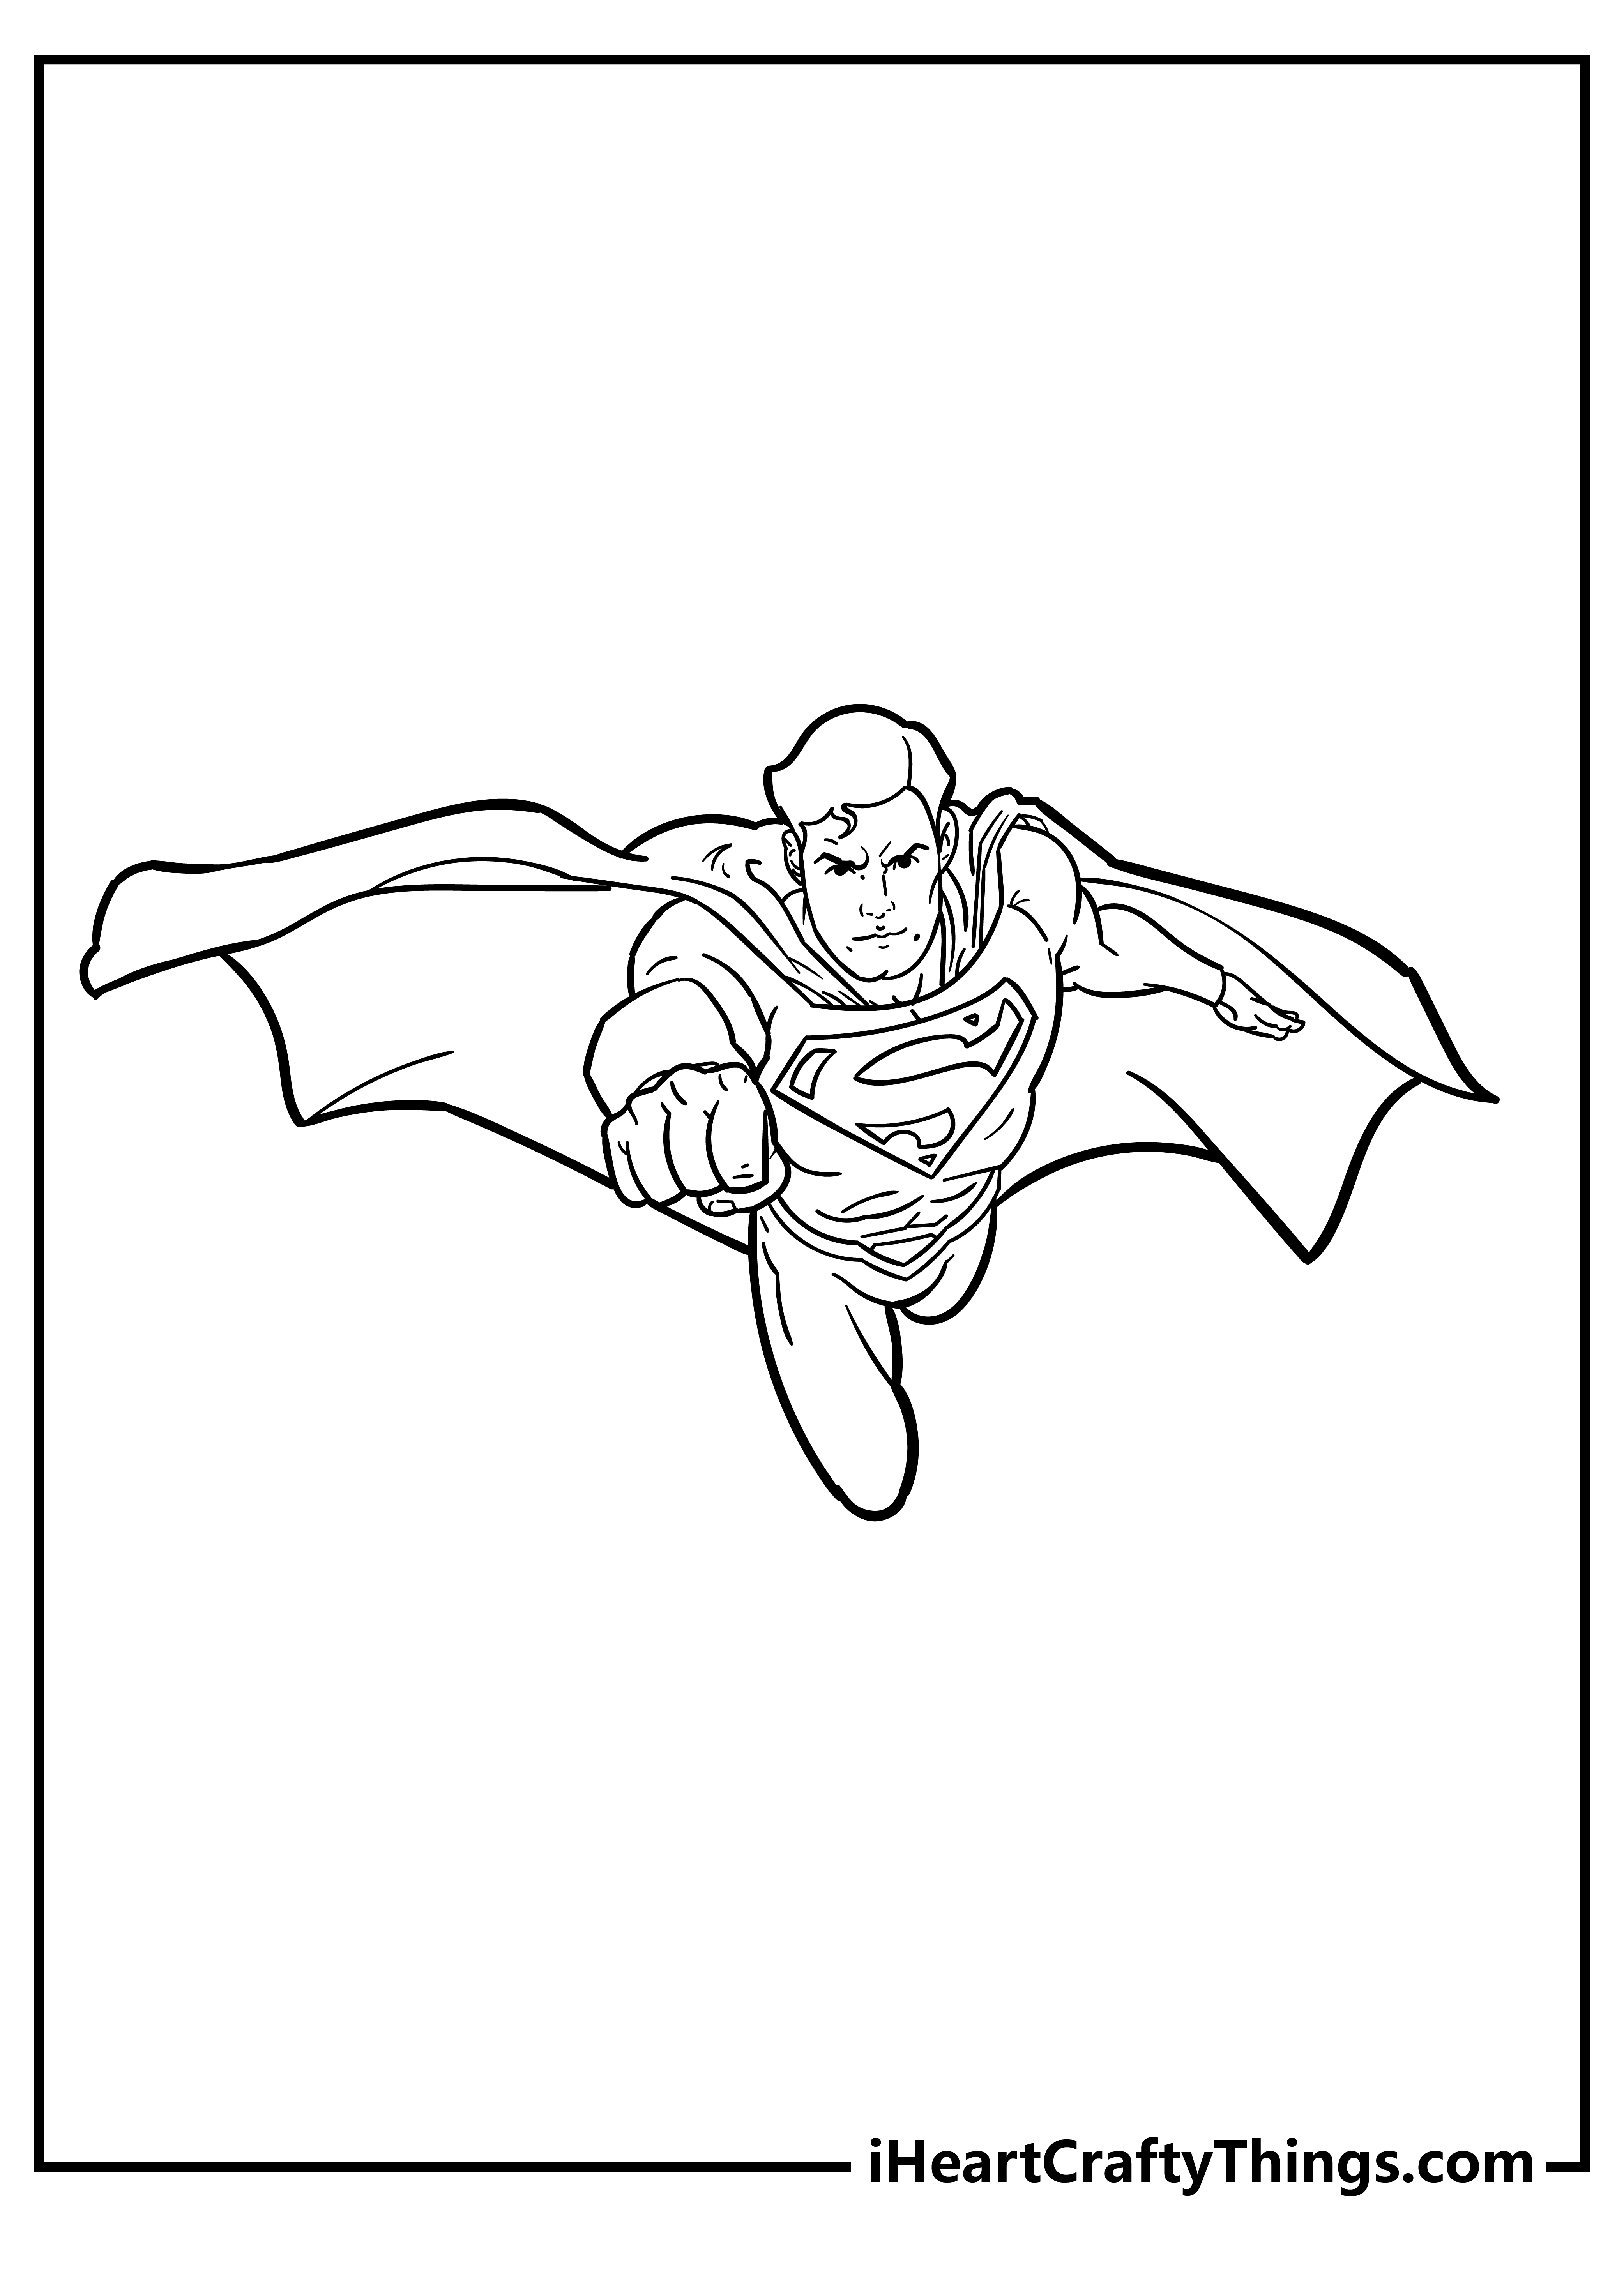 Superman Coloring Sheet for children free download